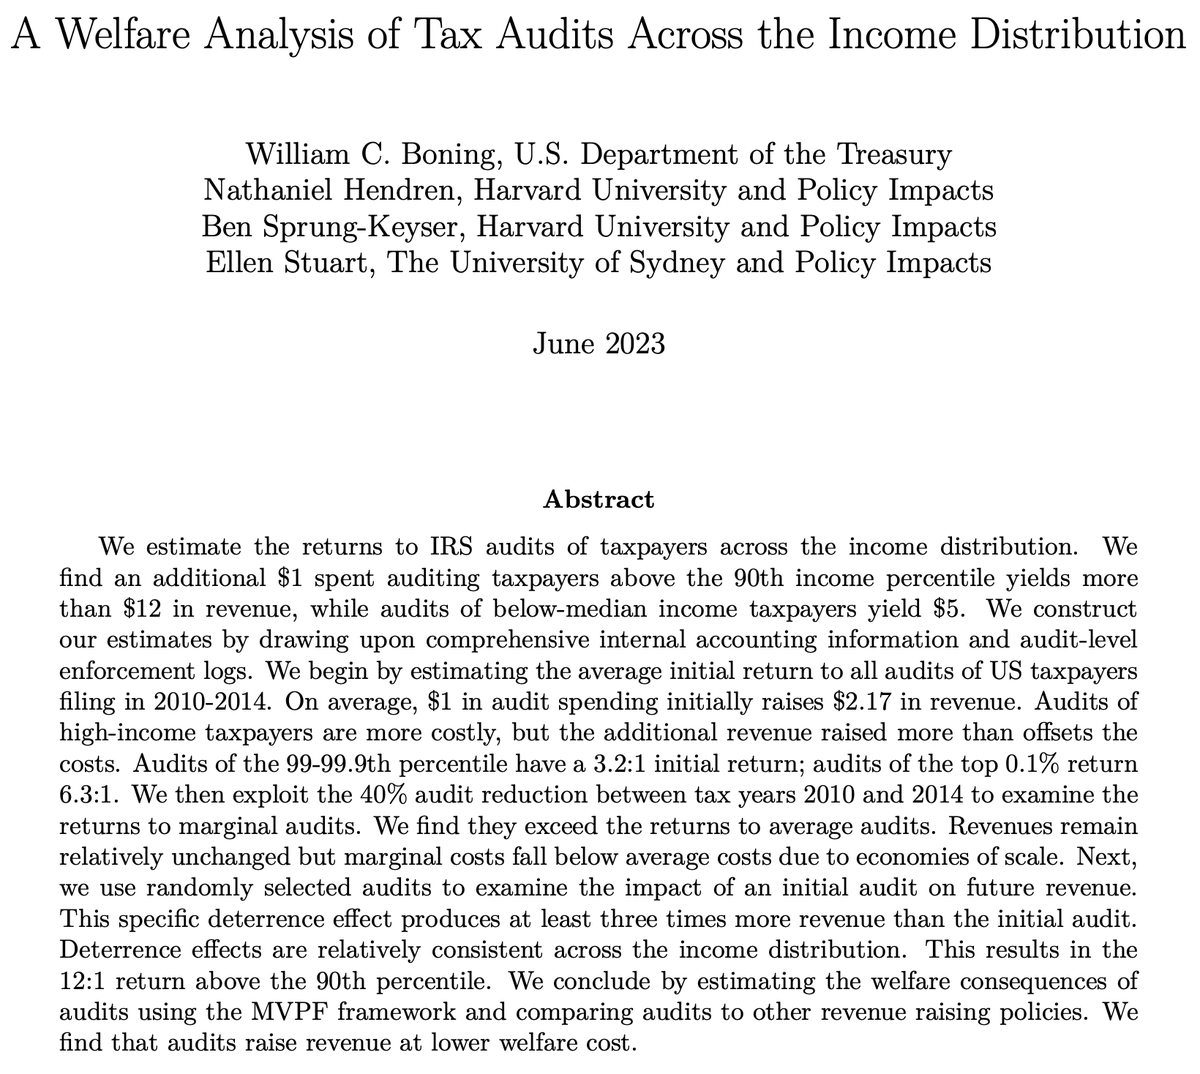 New Paper Alert 🚨 We estimate the returns to IRS tax audits across the income distribution. We find $1 of IRS spending on audits of top earners delivers more than $12 of tax revenue. Along the way, we provide new evidence of the strong specific deterrence effects of audits. 1/: